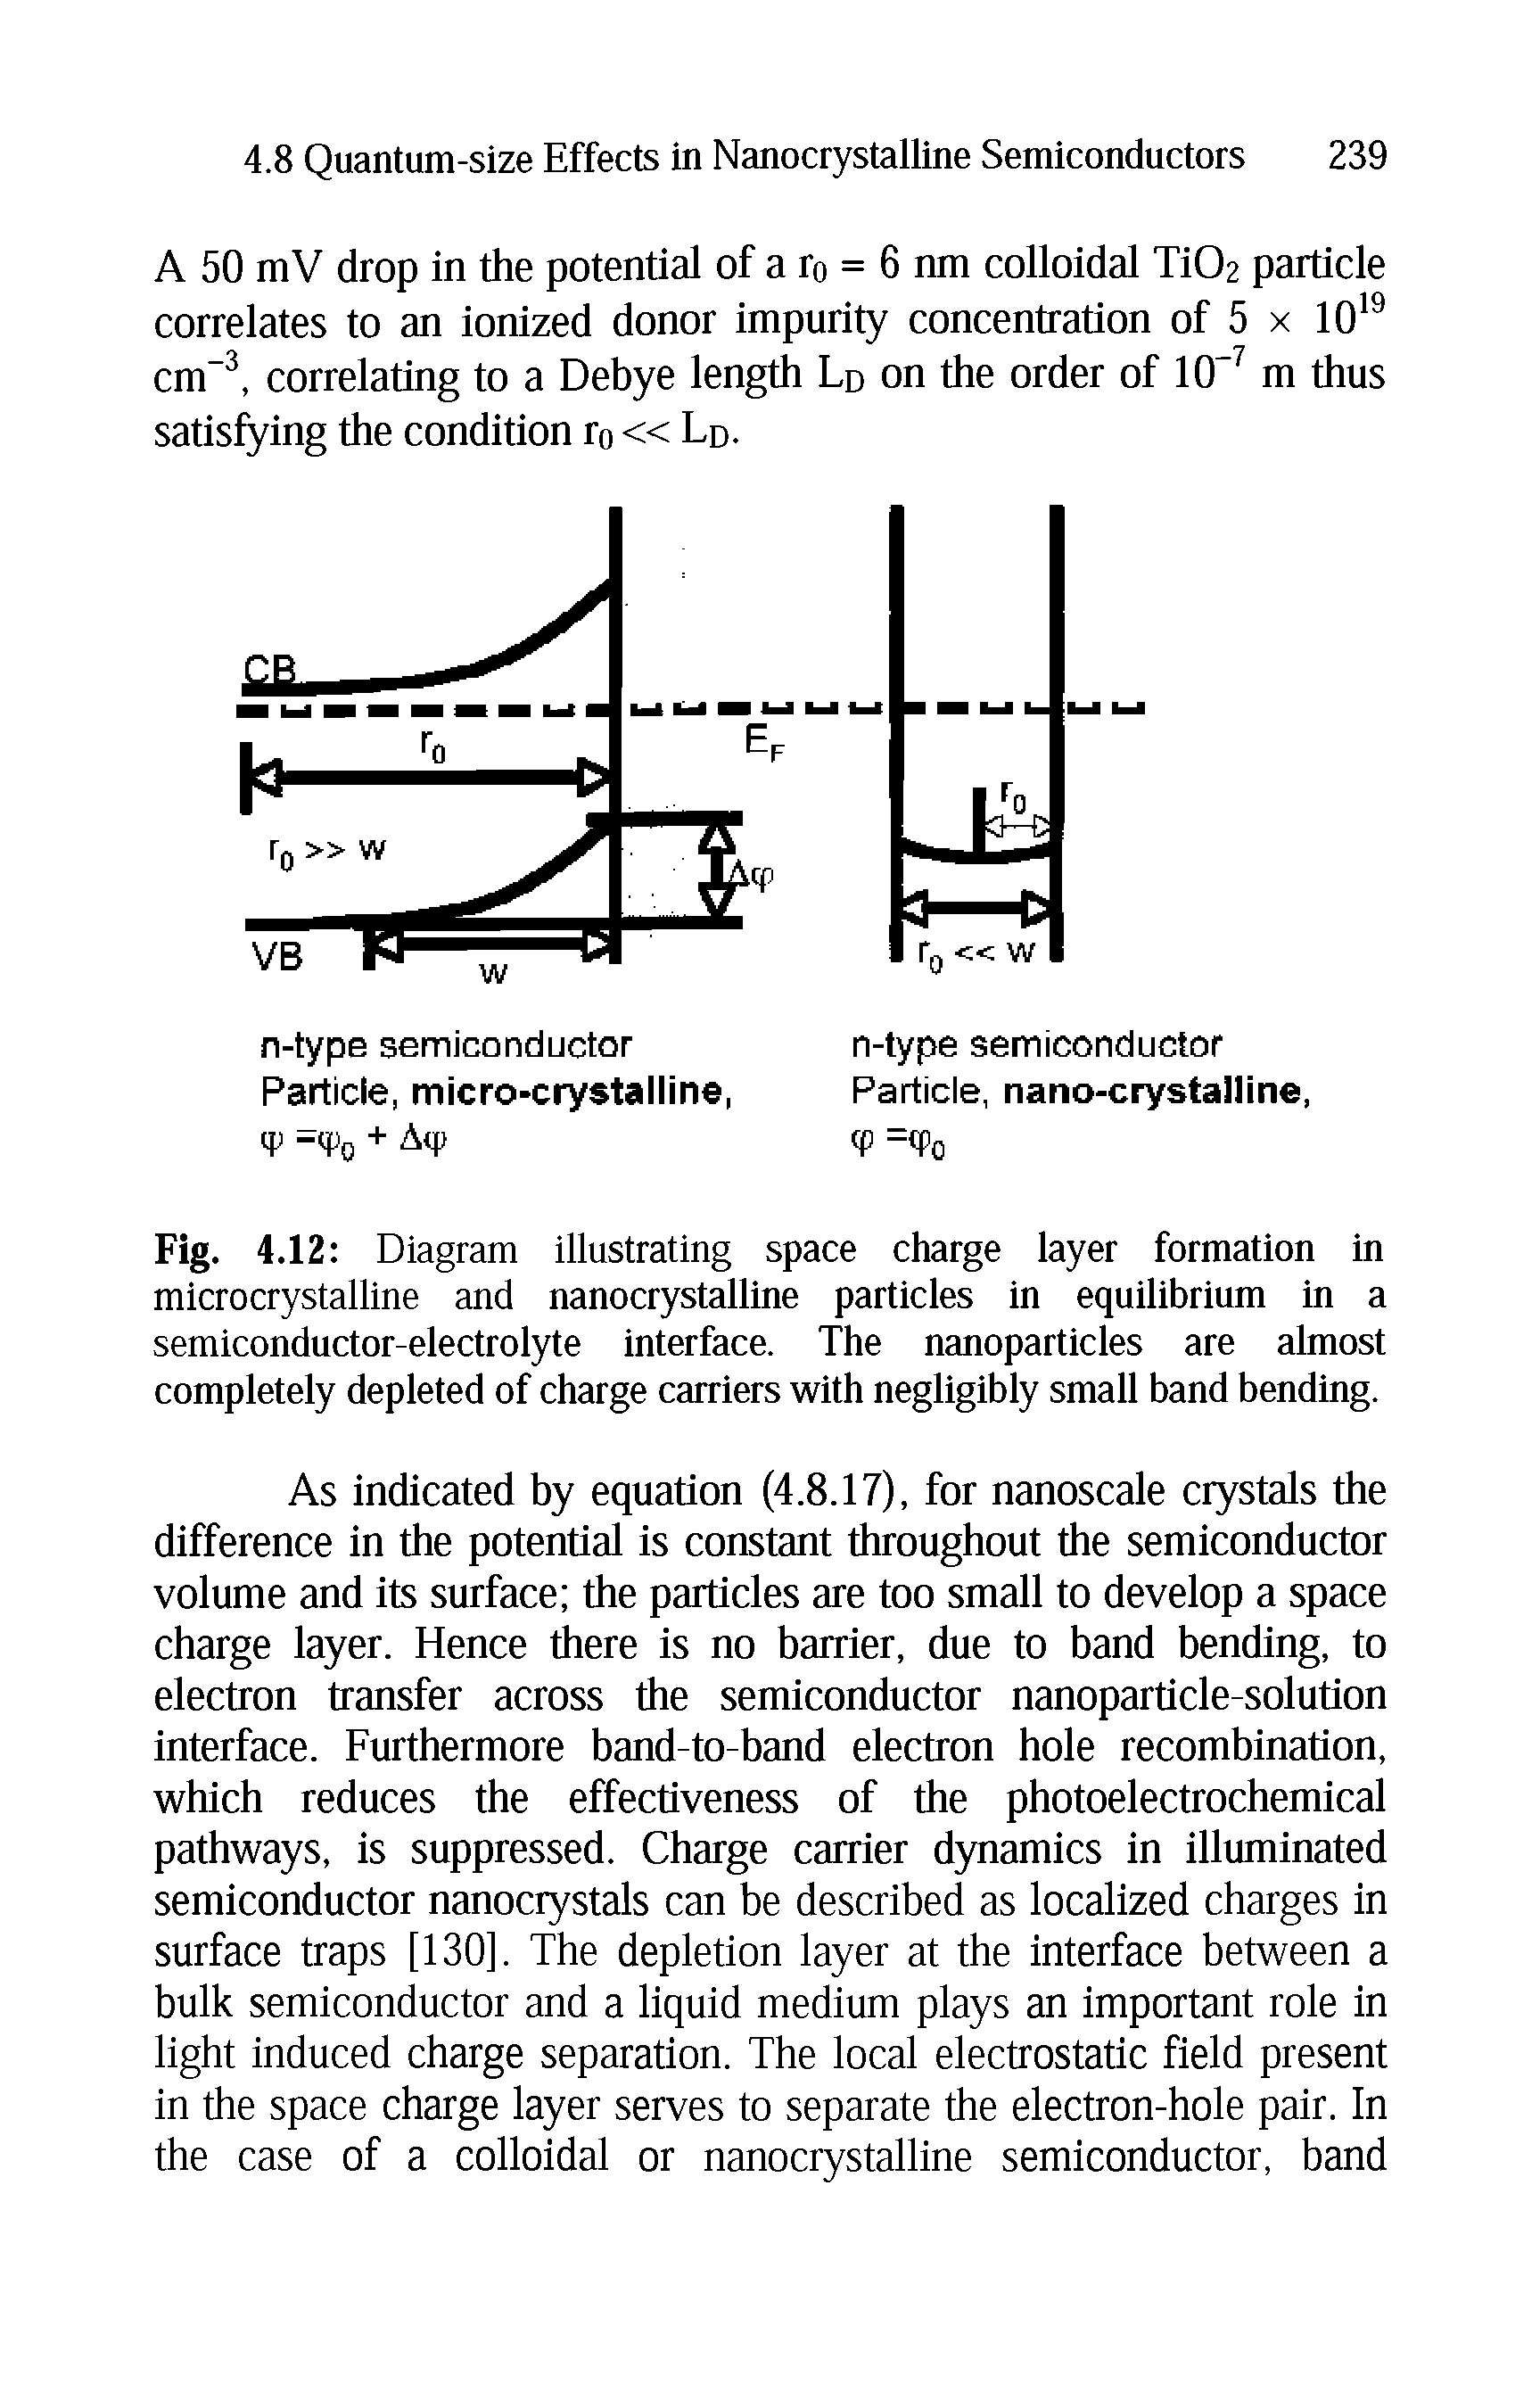 Fig. 4.12 Diagram illustrating space charge layer formation in microcrystalline and nanocrystalline particles in equilibrium in a semiconductor-electrolyte interface. The nanoparticles are almost completely depleted of charge carriers with negligibly small band bending.